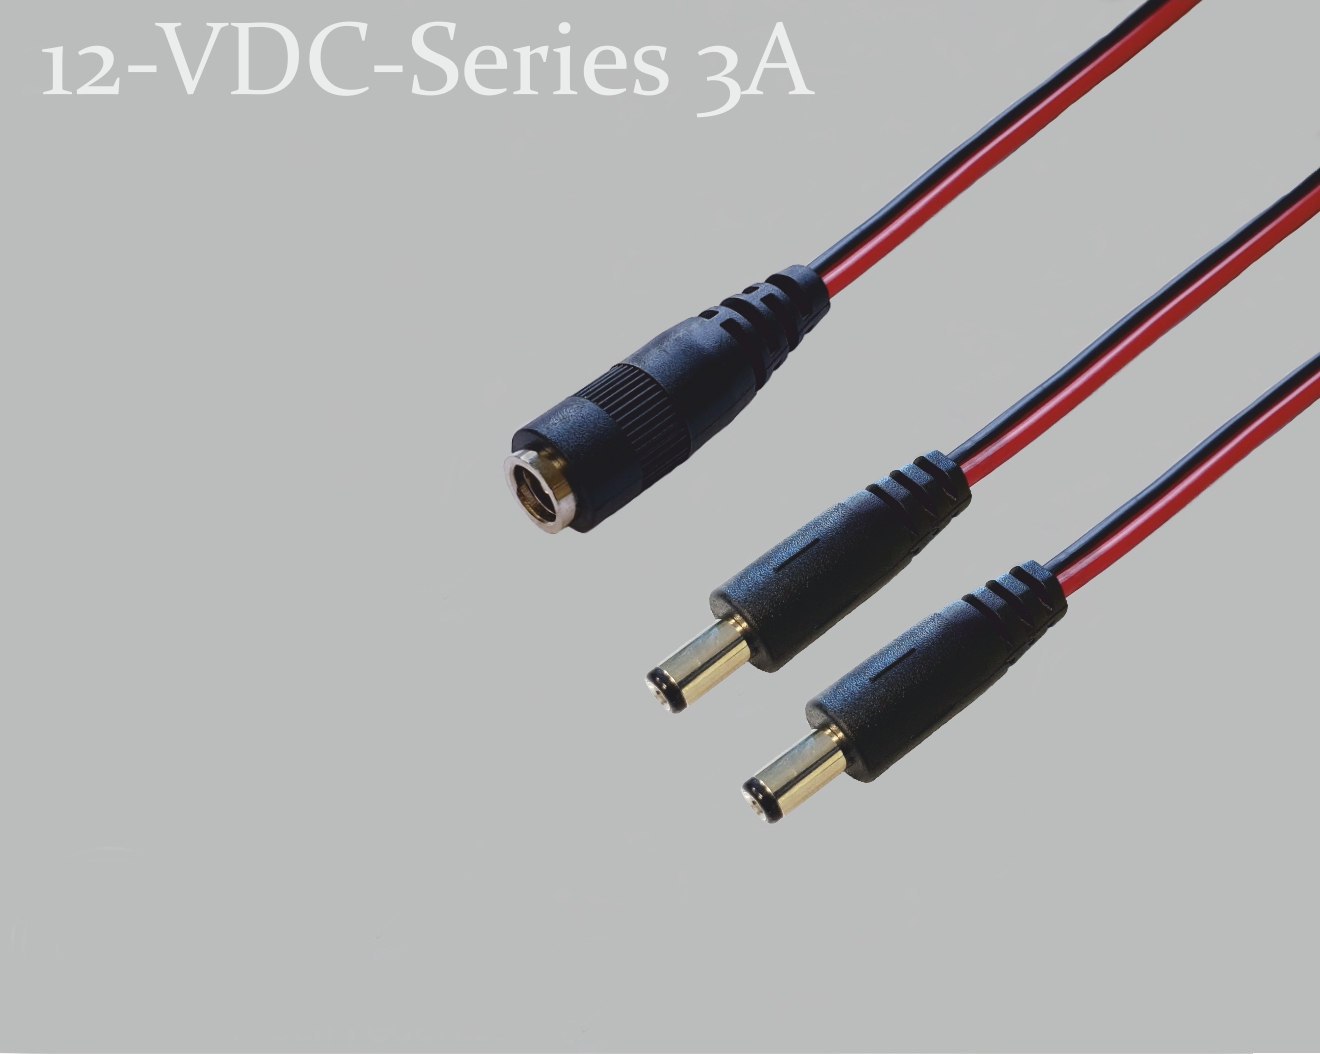 12-VDC-Series 3A, DC distributor 1x DC coupling to 2x DC plug with spring contact, 2.1x5.5mm, flat cable 2x0.4mm², red/black, 0.3m